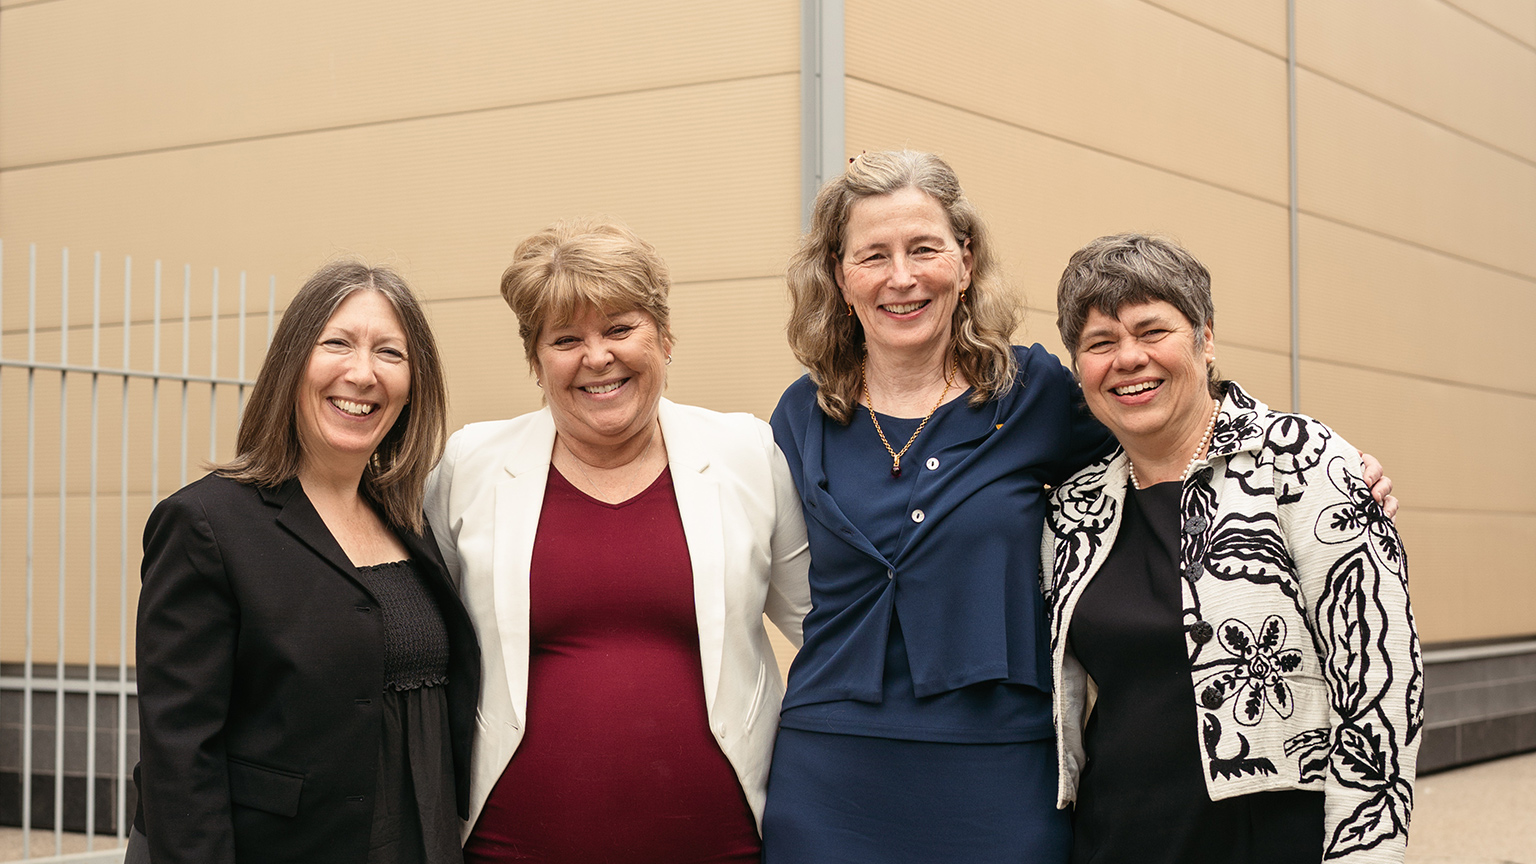 Jane Goodyer, Heather Sheardown, Mary Wells and Suzanne Kresta pose together with their arms around each other